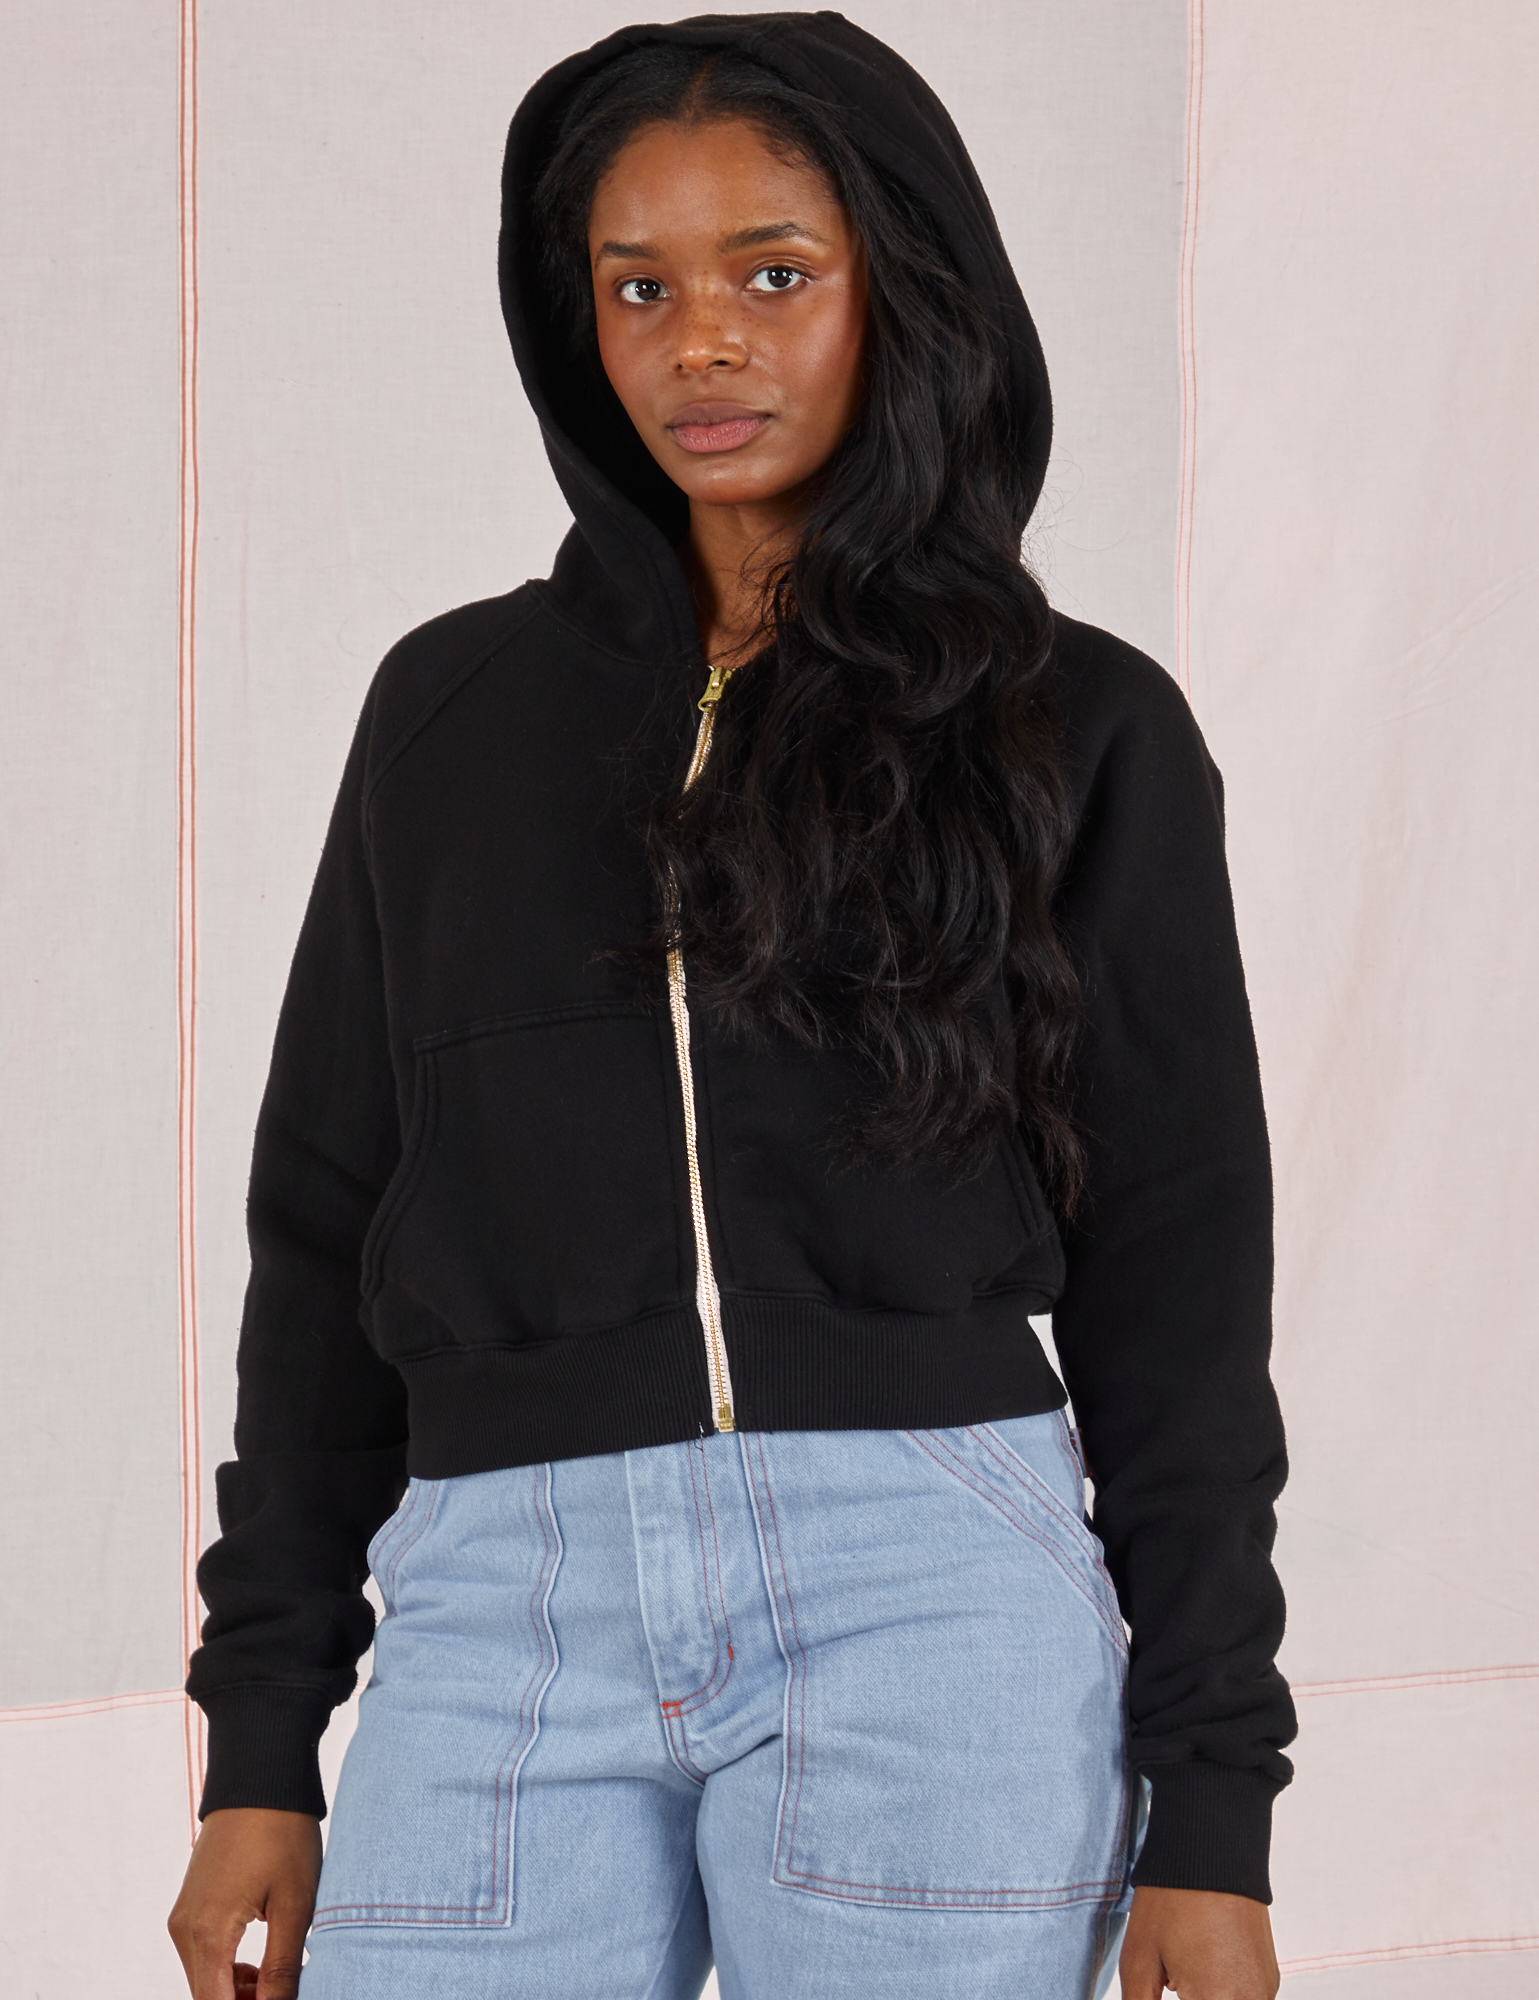 Kandia is wearing Cropped Zip Hoodie in Basic Black with the hood up and light wash Carpenter Jeans